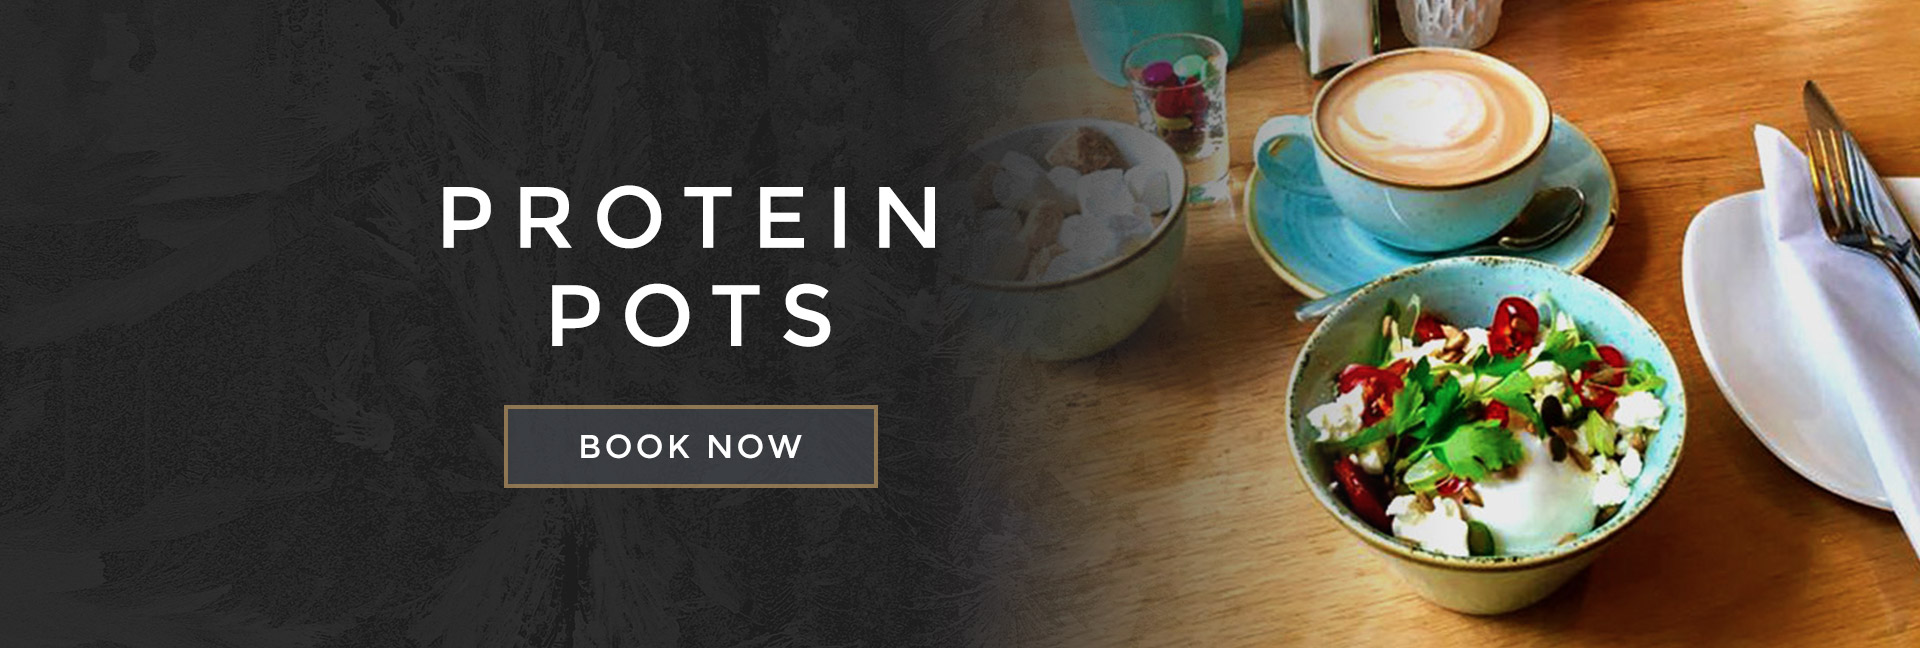 Protein pots at All Bar One The O2 - Book your table